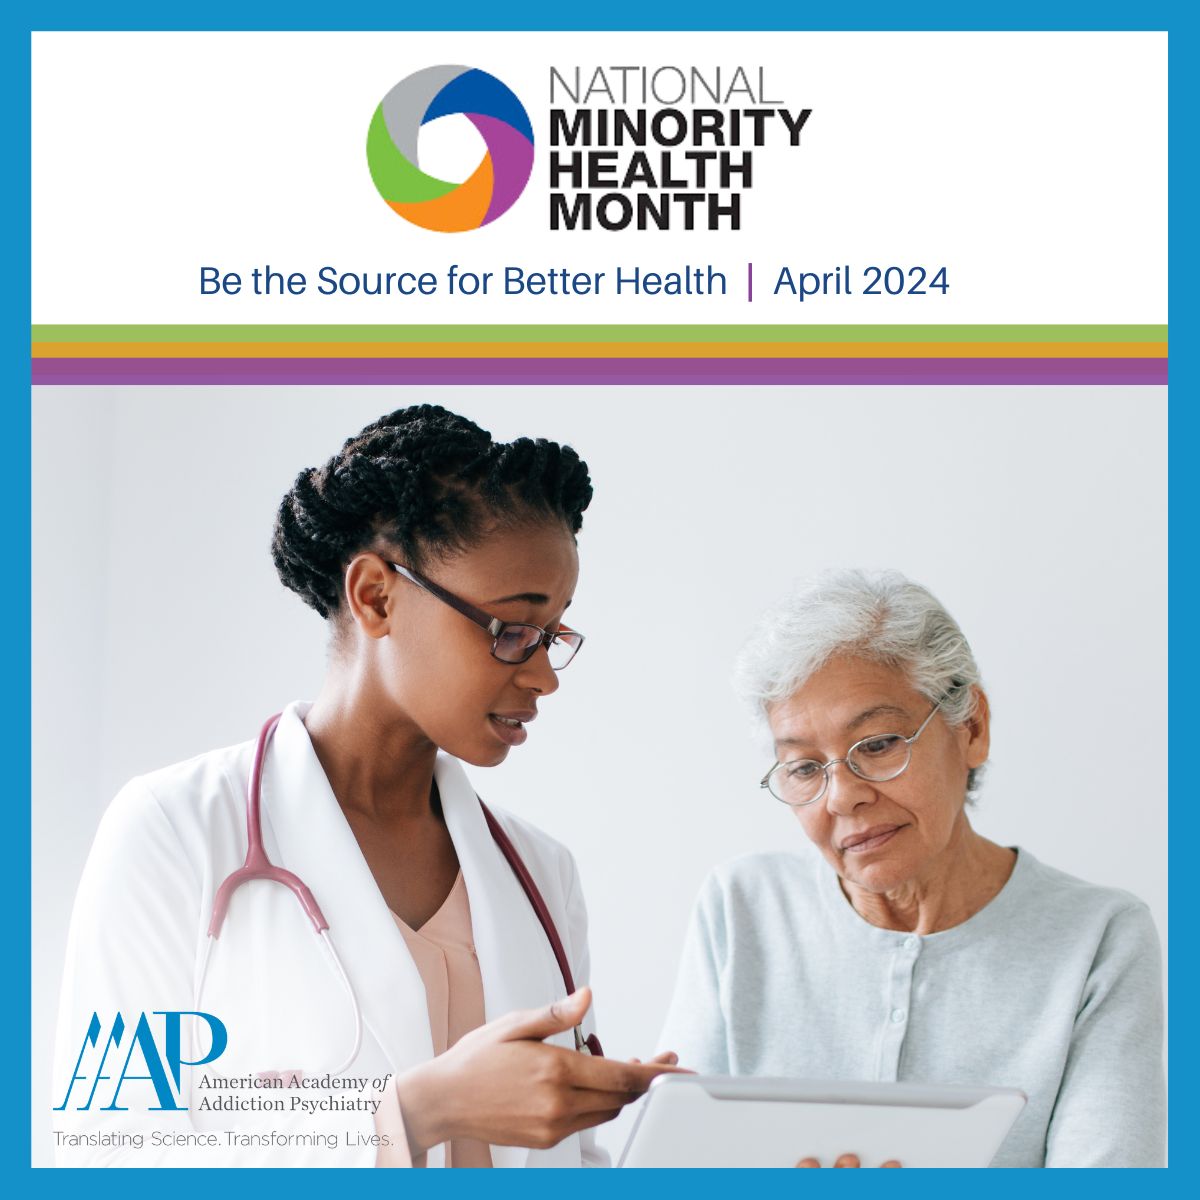 In honor of @MinorityHealth, @SAMHSAGov’s Behavioral Health Equity Fact Sheet details their latest initiatives to promote mental health, prevent substance misuse, and provide treatments and support to improve the lives of underserved communities: bit.ly/4azedLS #NMHM24